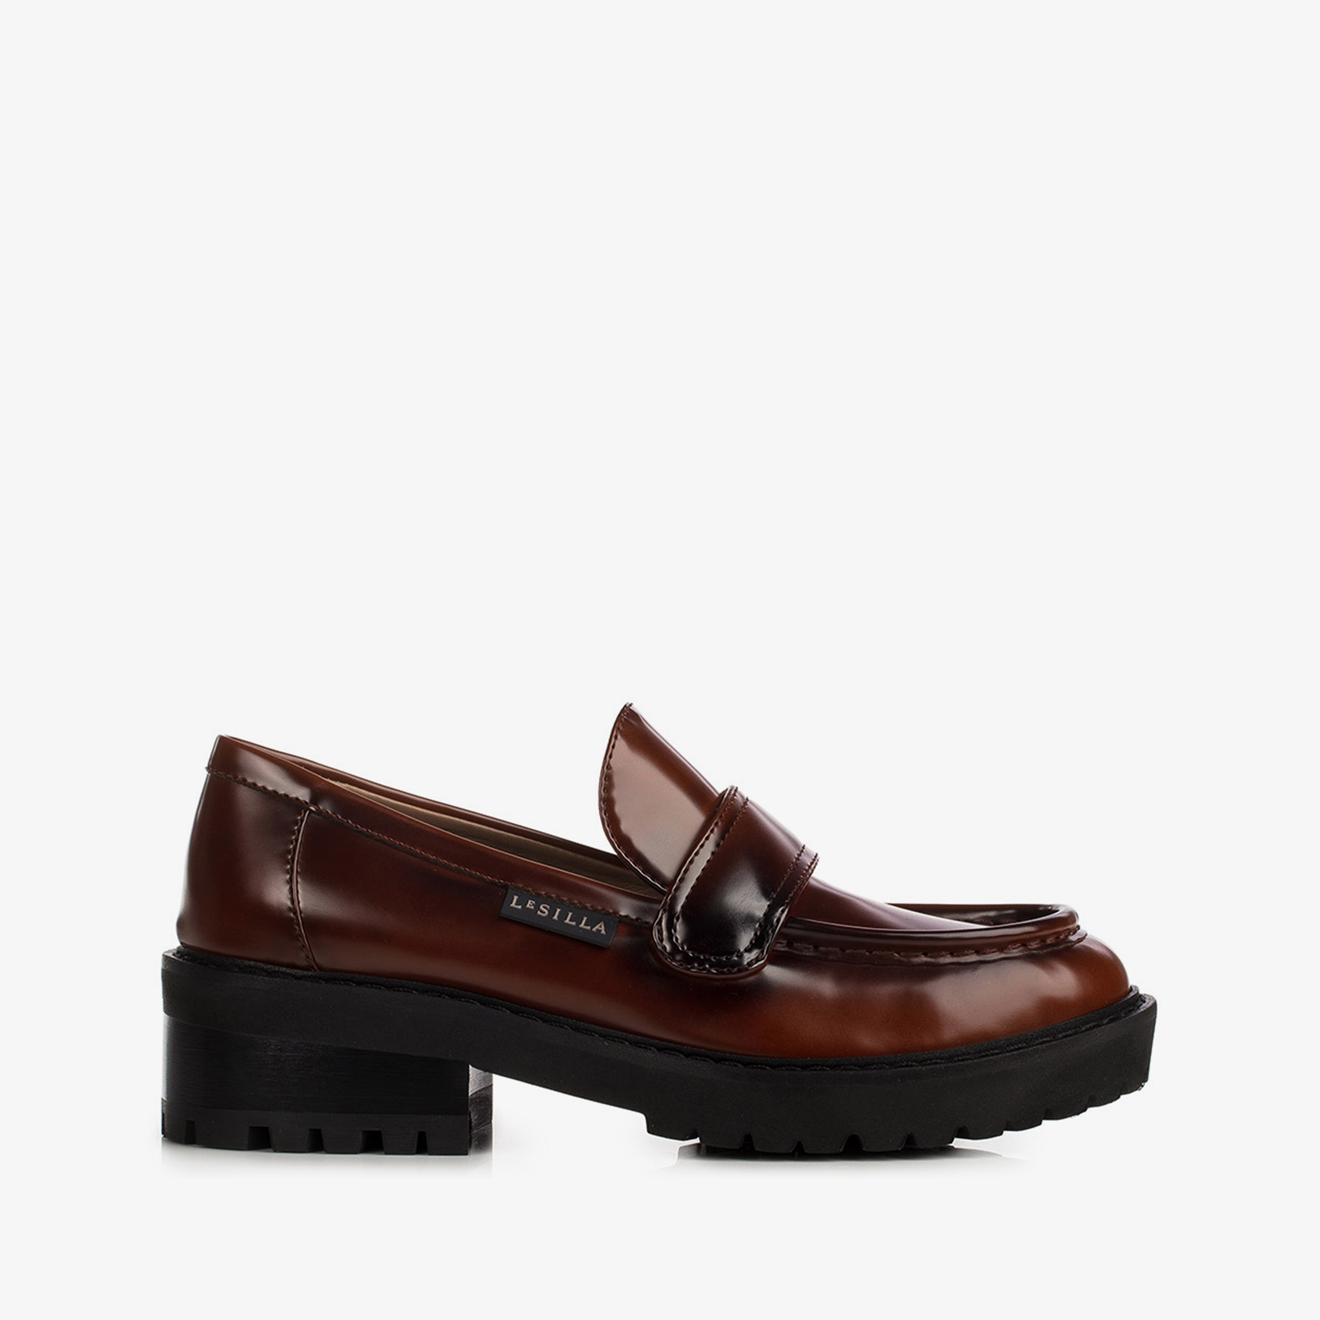 CITYLIFE LOAFER 50 mm - Le Silla official outlet